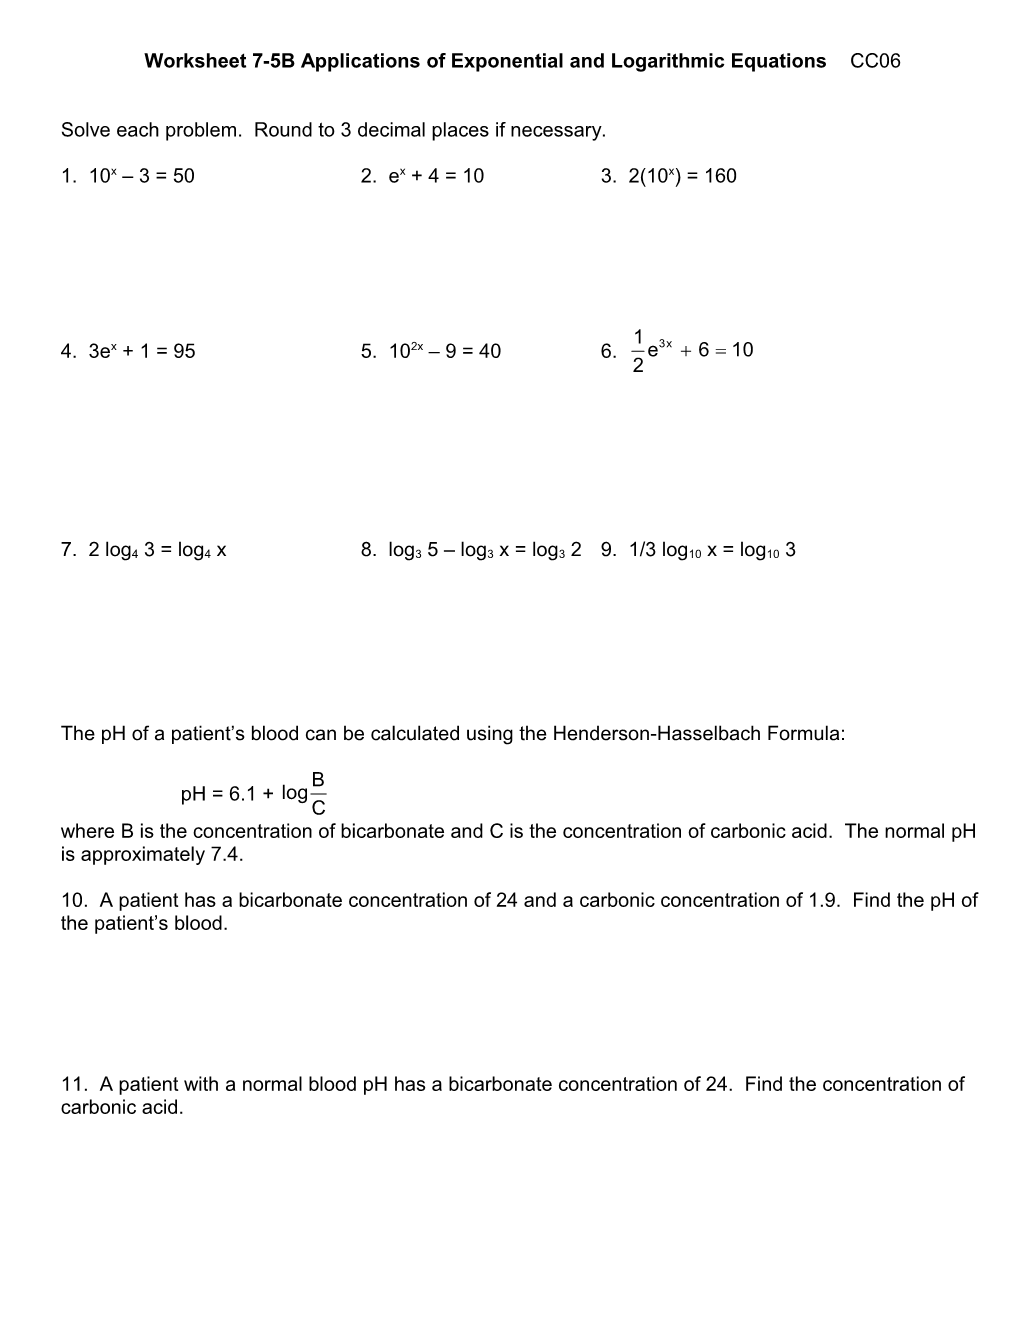 Worksheet 7-5B Applications of Exponential and Logarithmic Equations CC06